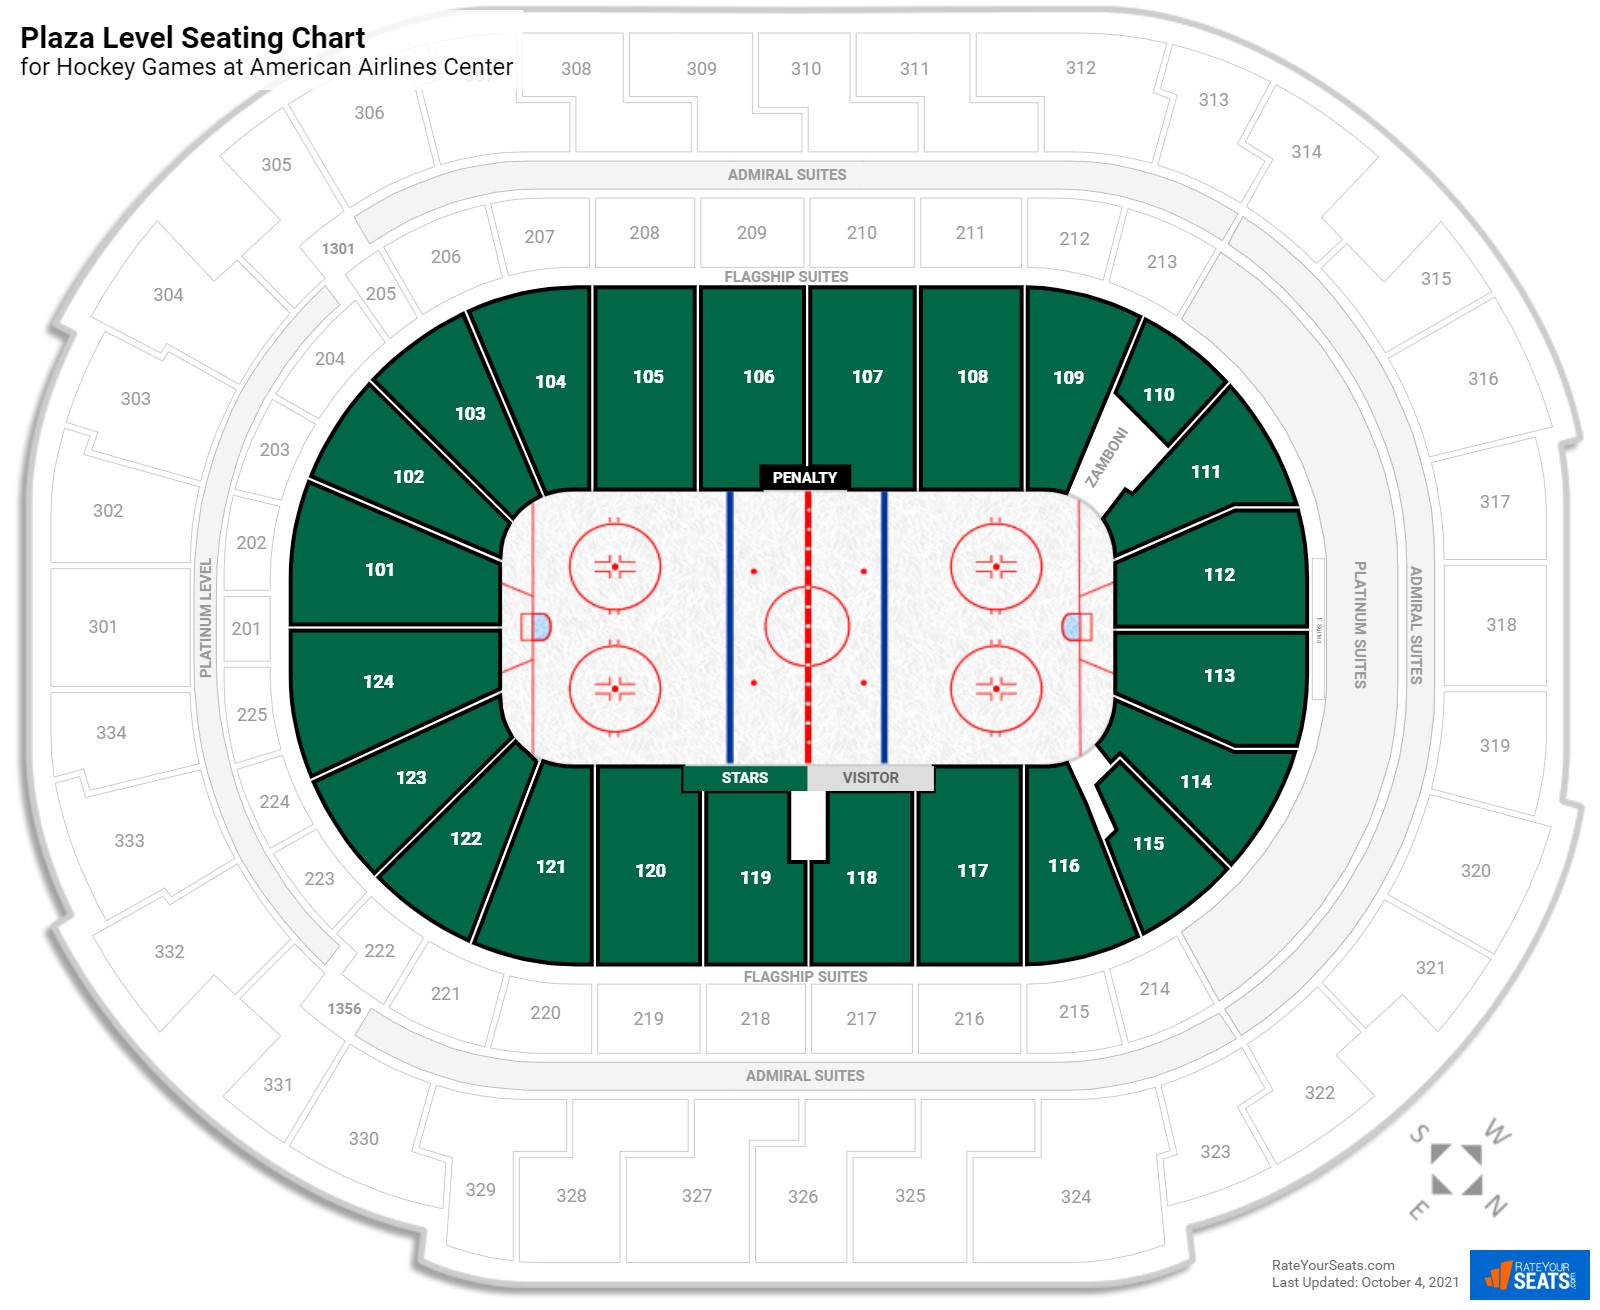 American Airlines Center Seating Chart & Map